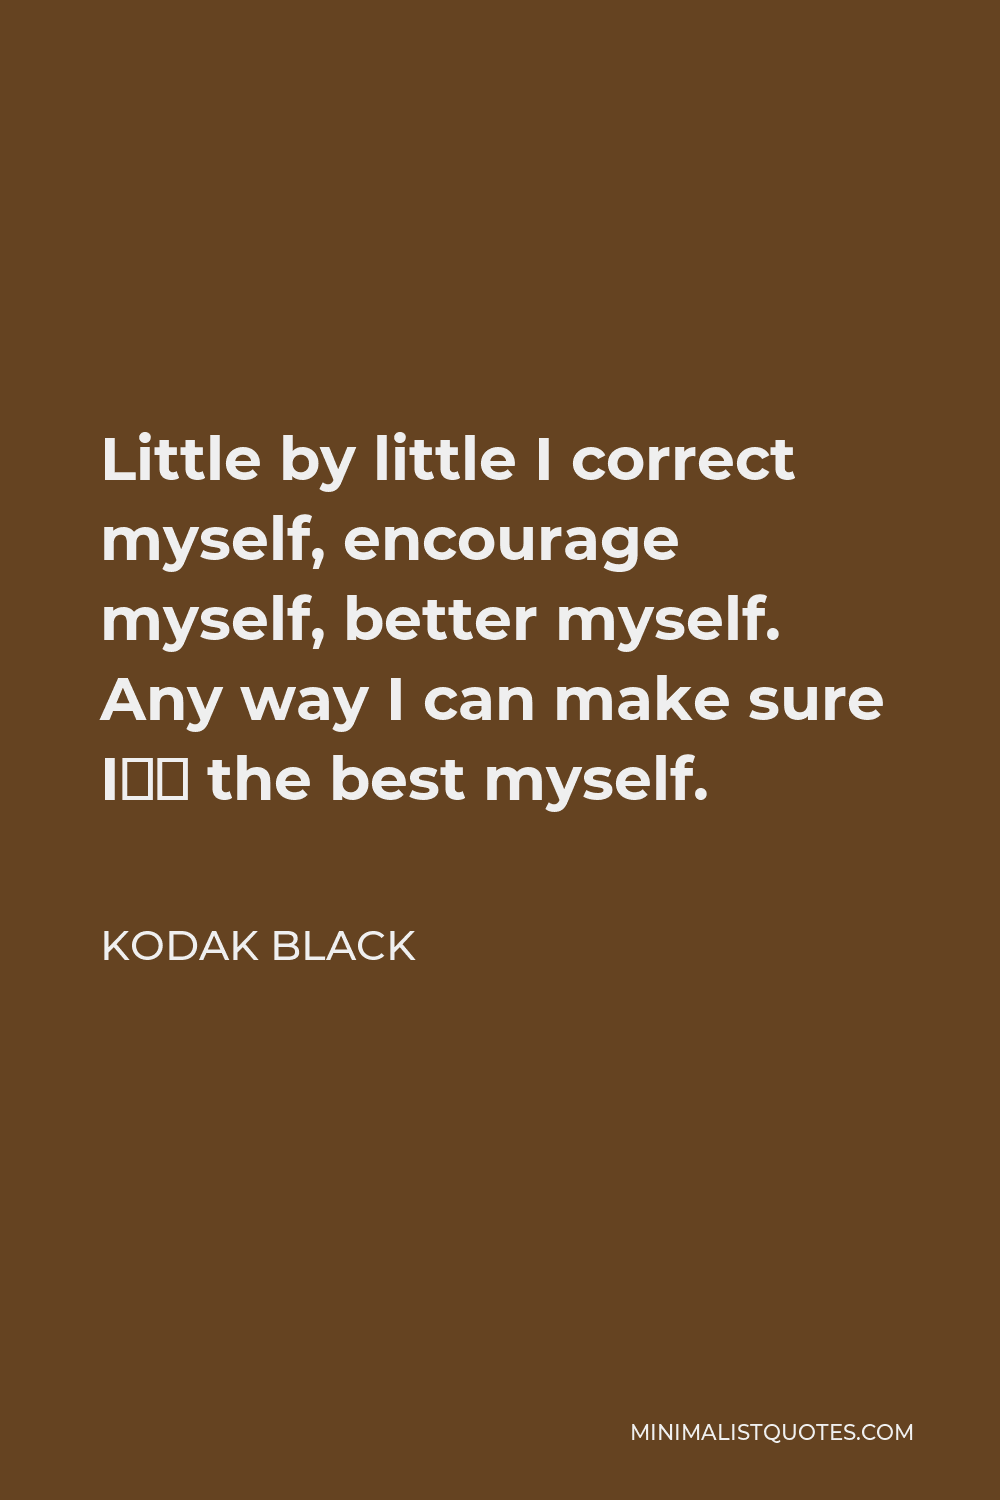 Kodak Black Quote - Little by little I correct myself, encourage myself, better myself. Any way I can make sure I’m the best myself.